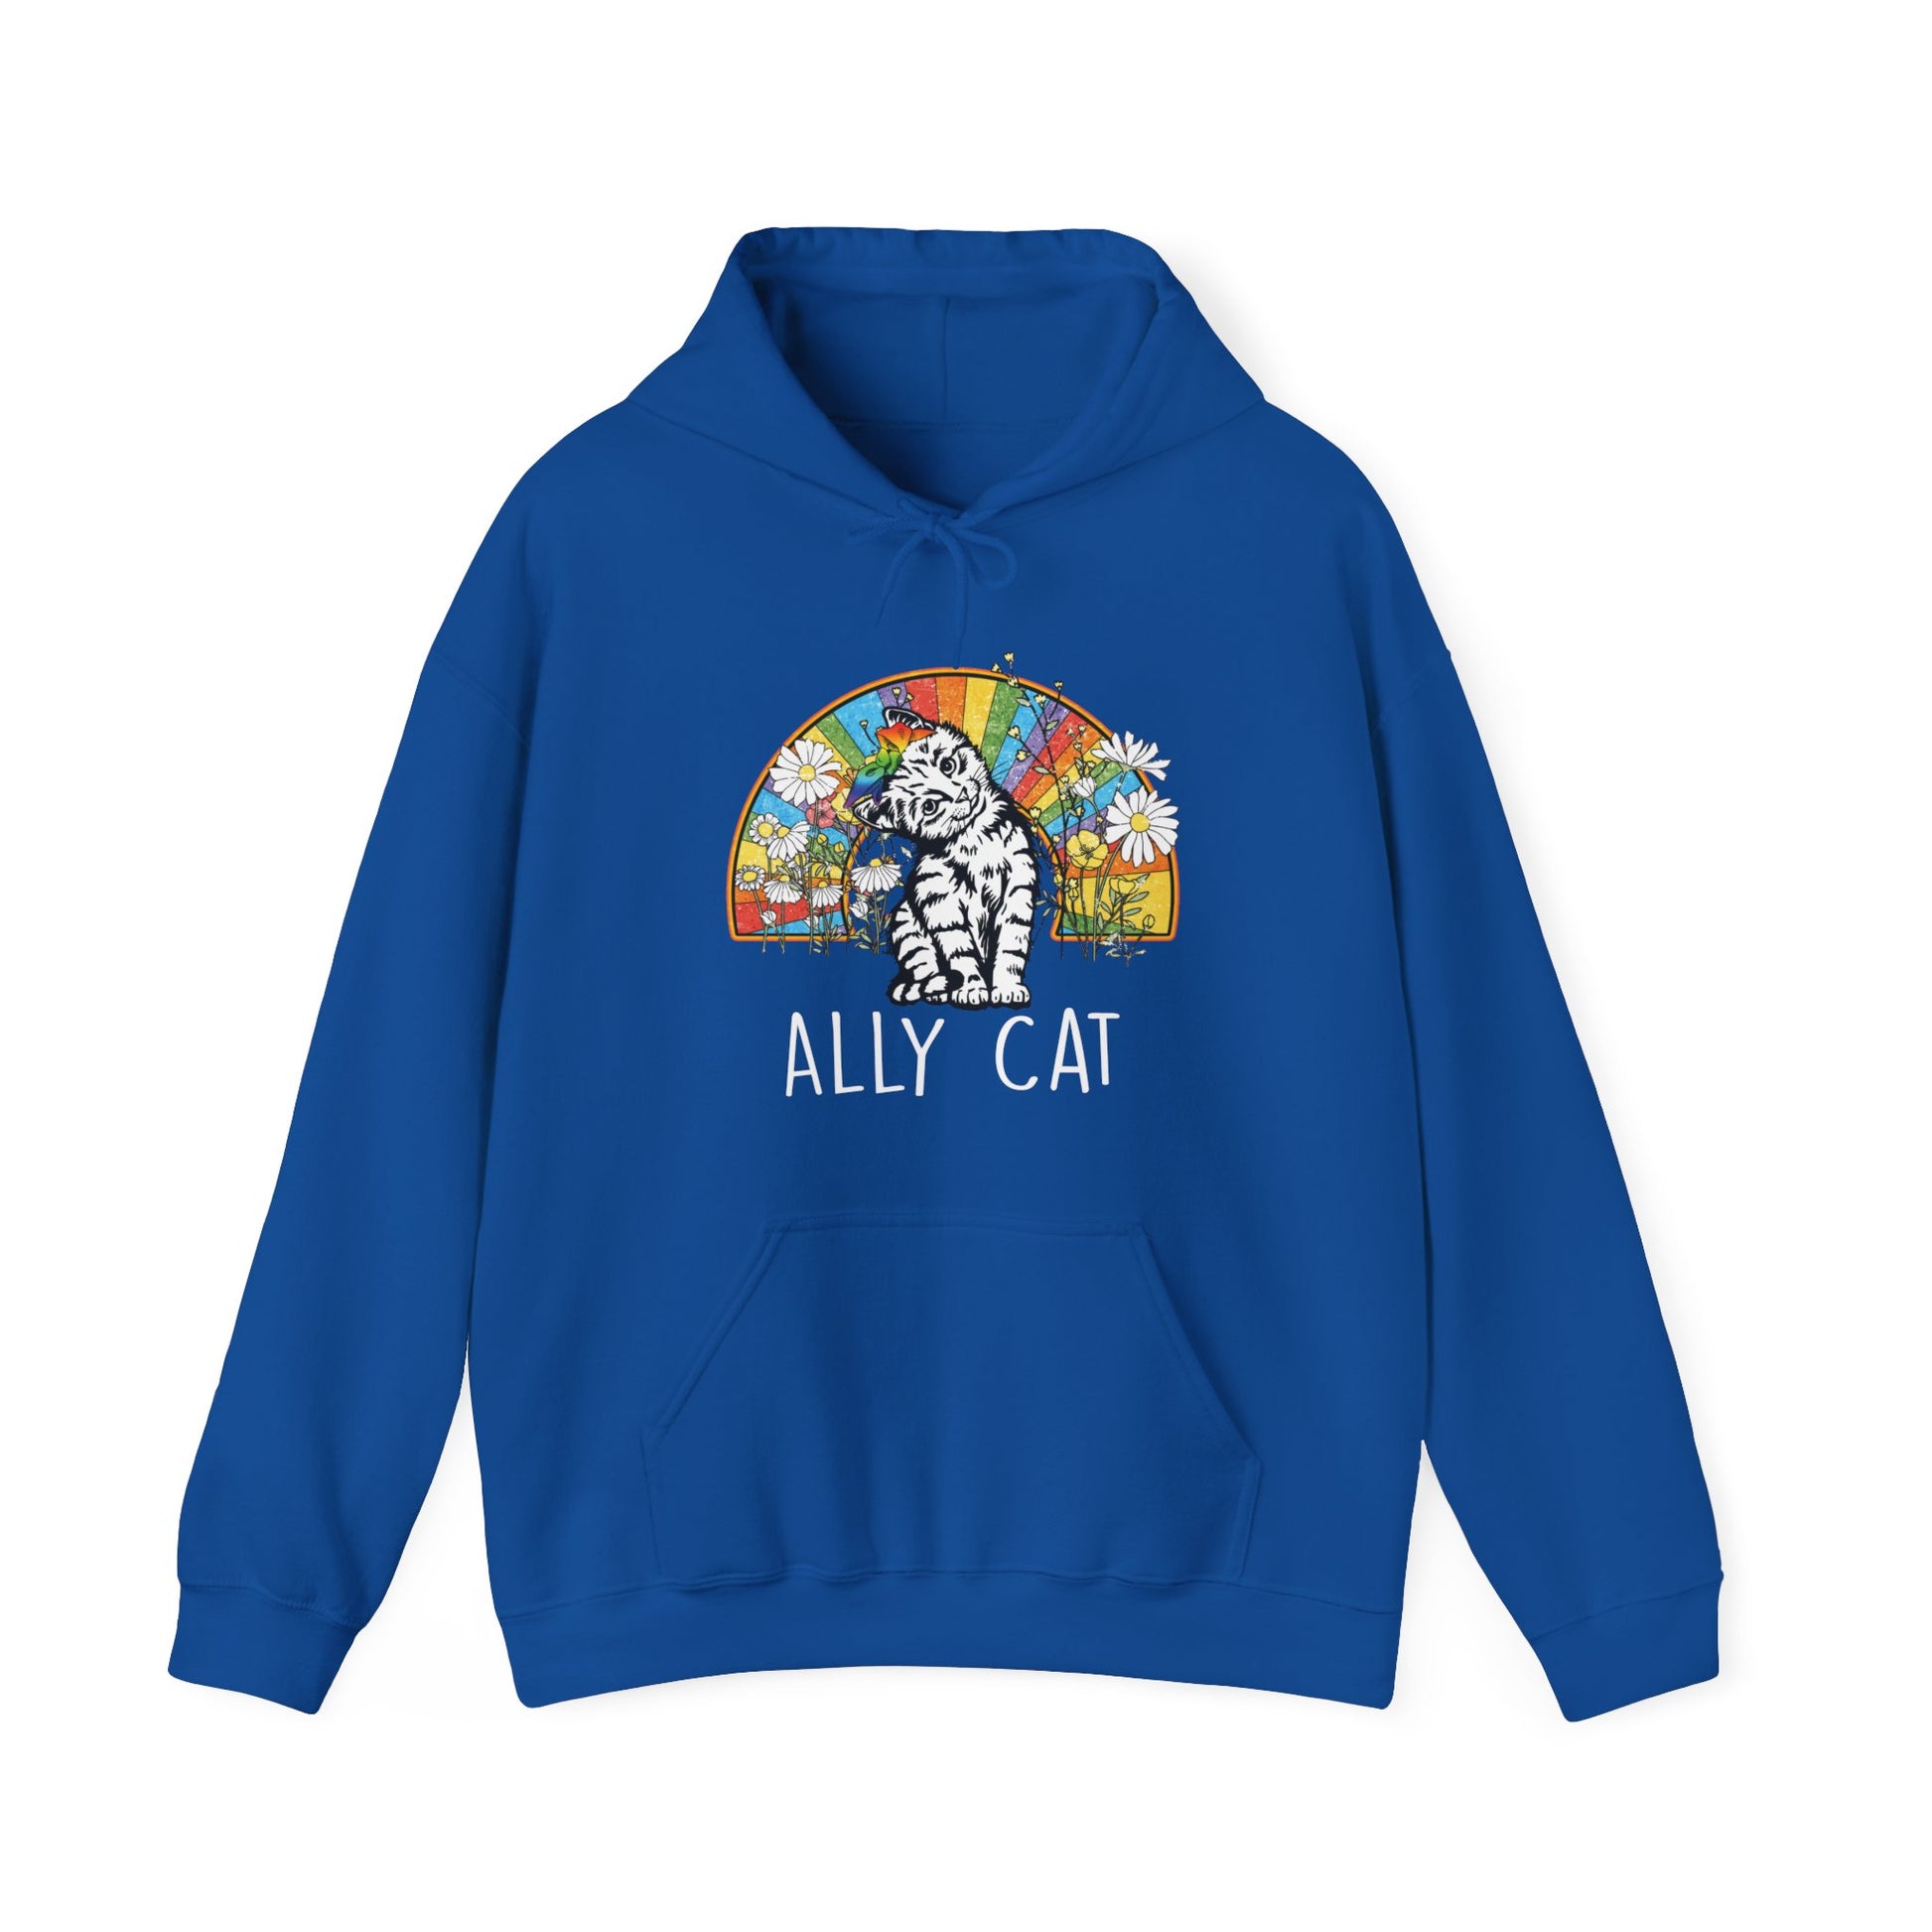 Ally Cat Hoodie - Equality Trading Post 